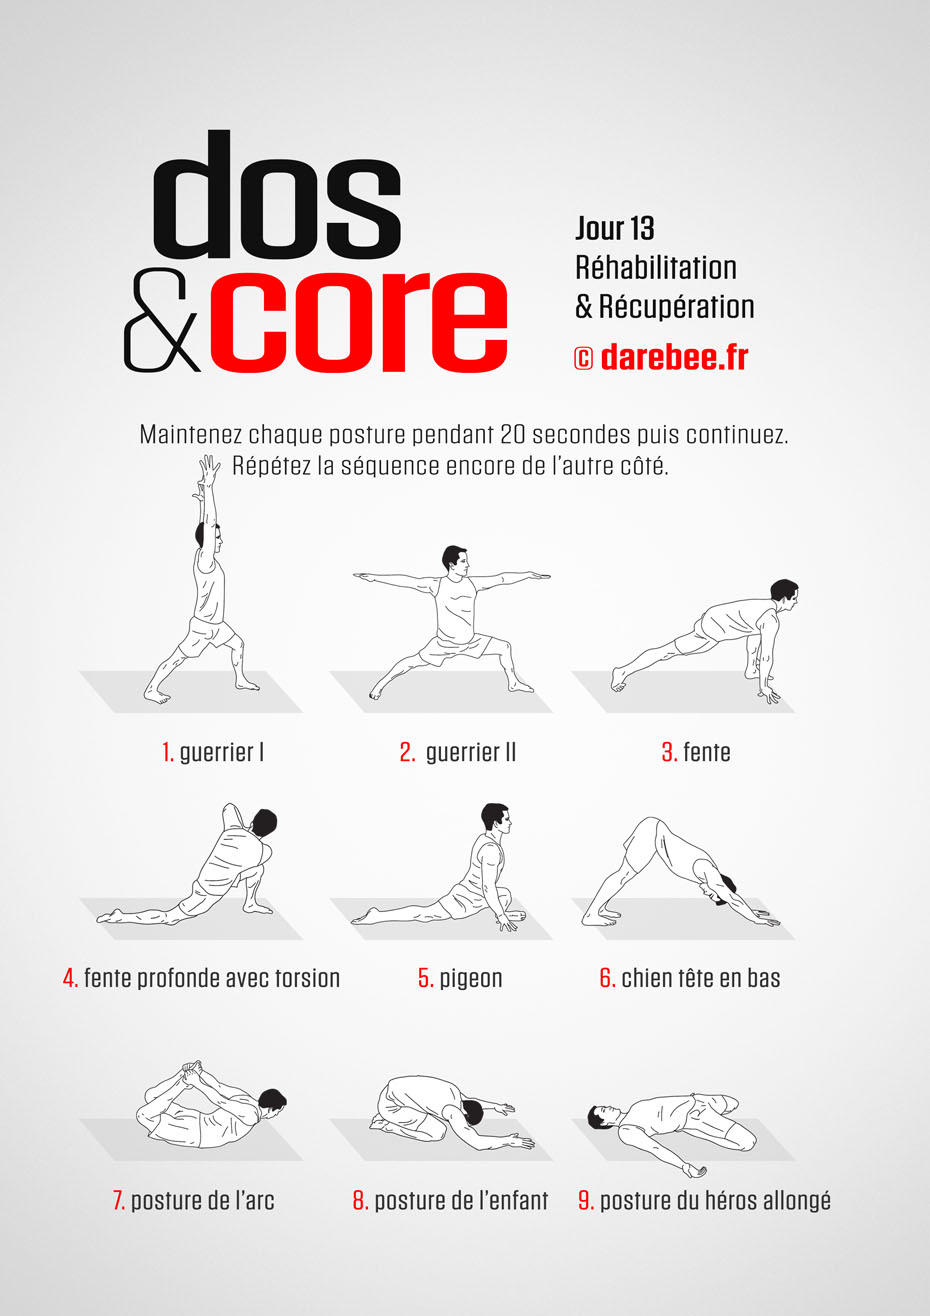 Back and Core - 30 Day Program by DAREBEE